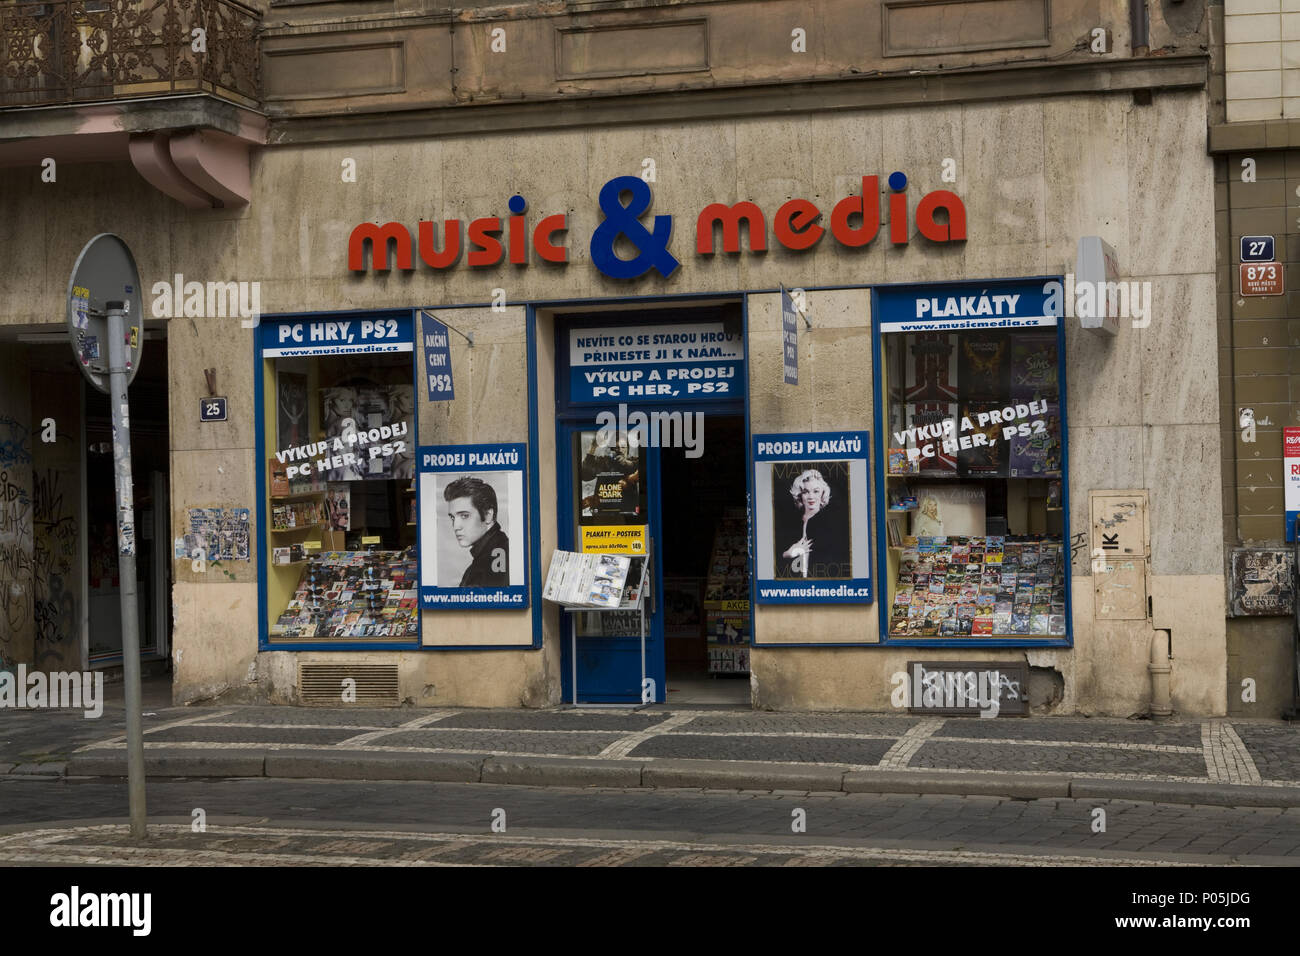 Marilyn Monroe and Elvis Presley are still archetypal entertainment  icons around the world as seen on this music and media store in Prague, Czech Republic.  2008 Stock Photo